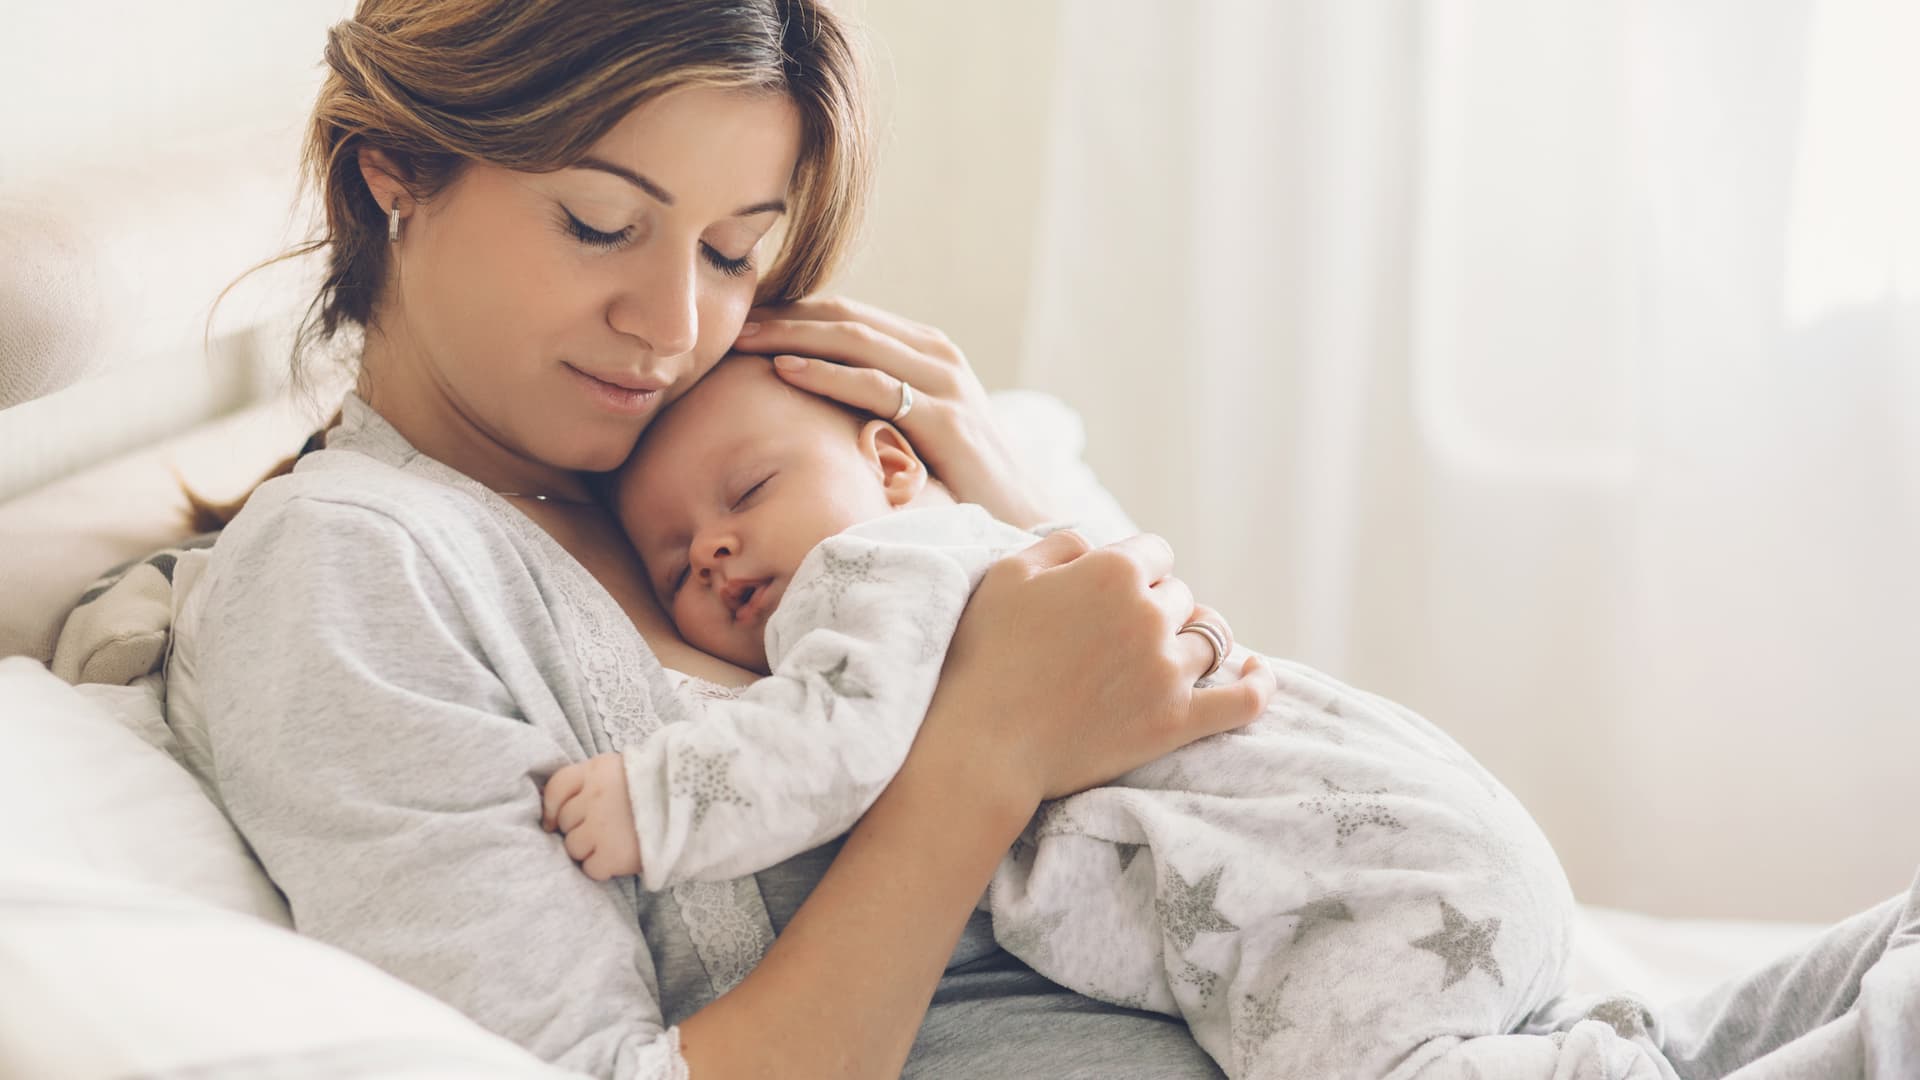 Self-Care for the Breastfeeding Mother